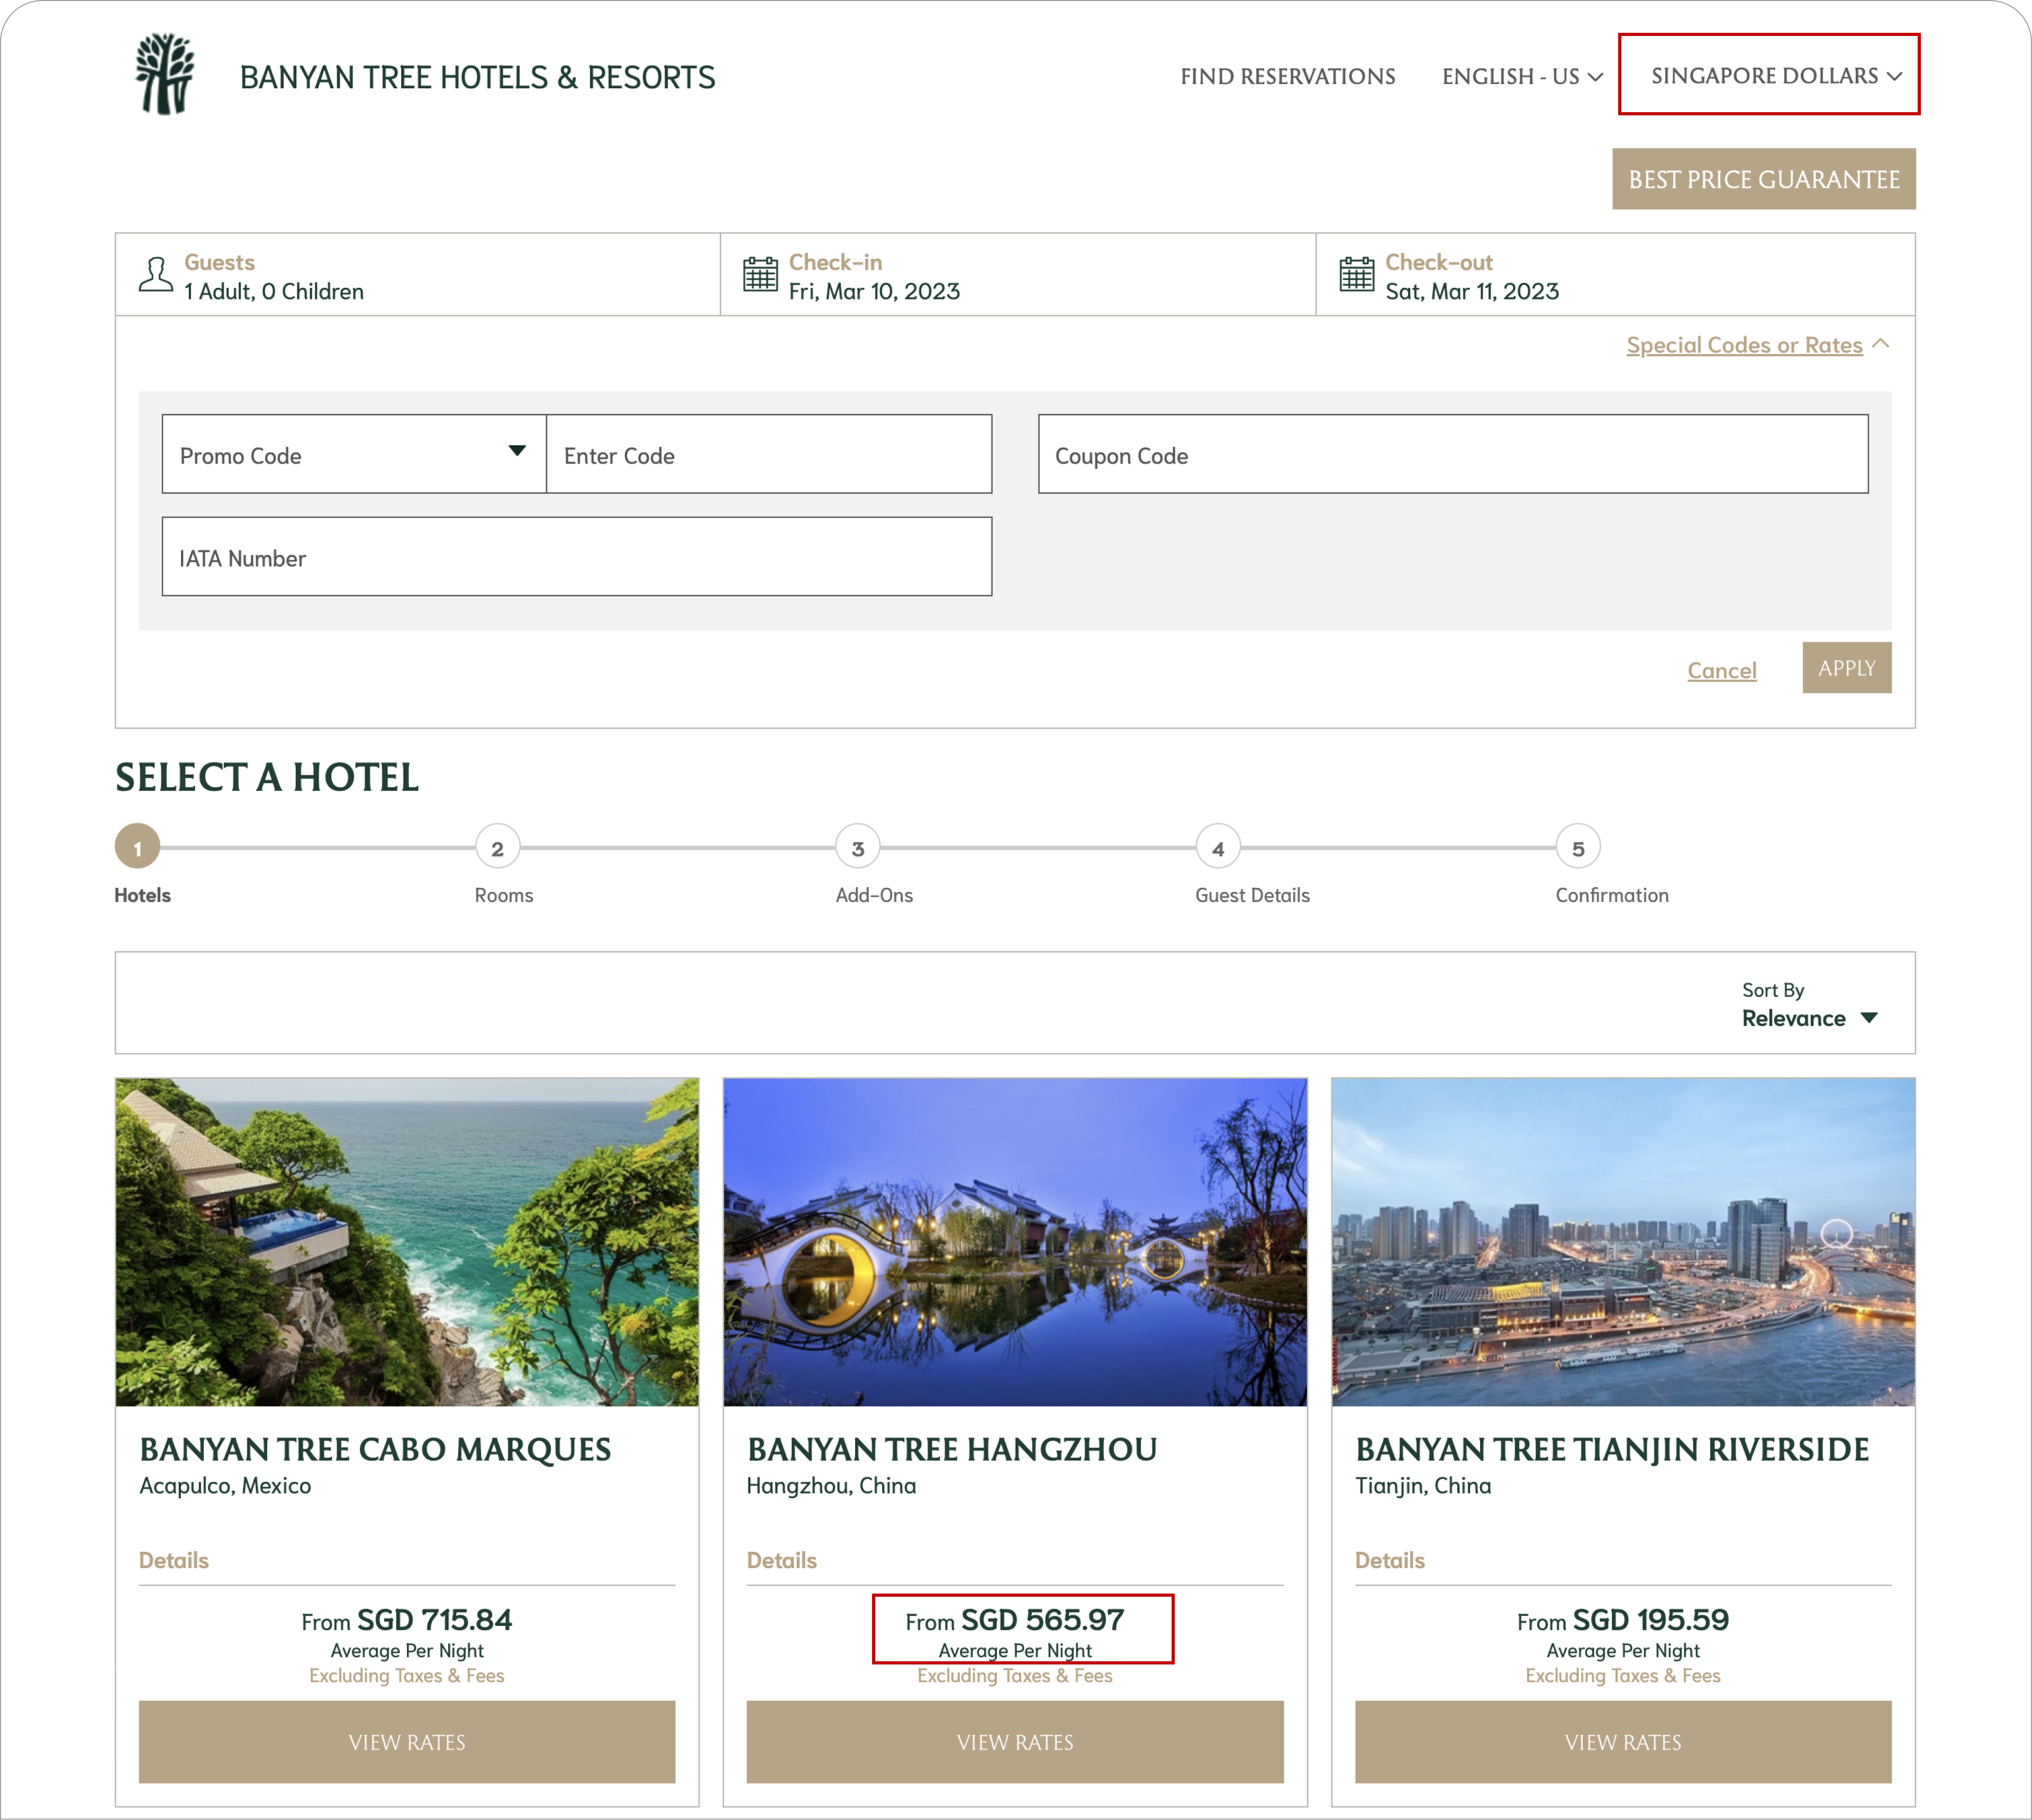 The Drupal websites also automatically adjust the currency parameter according to the location of the hotel when generating the Booking page